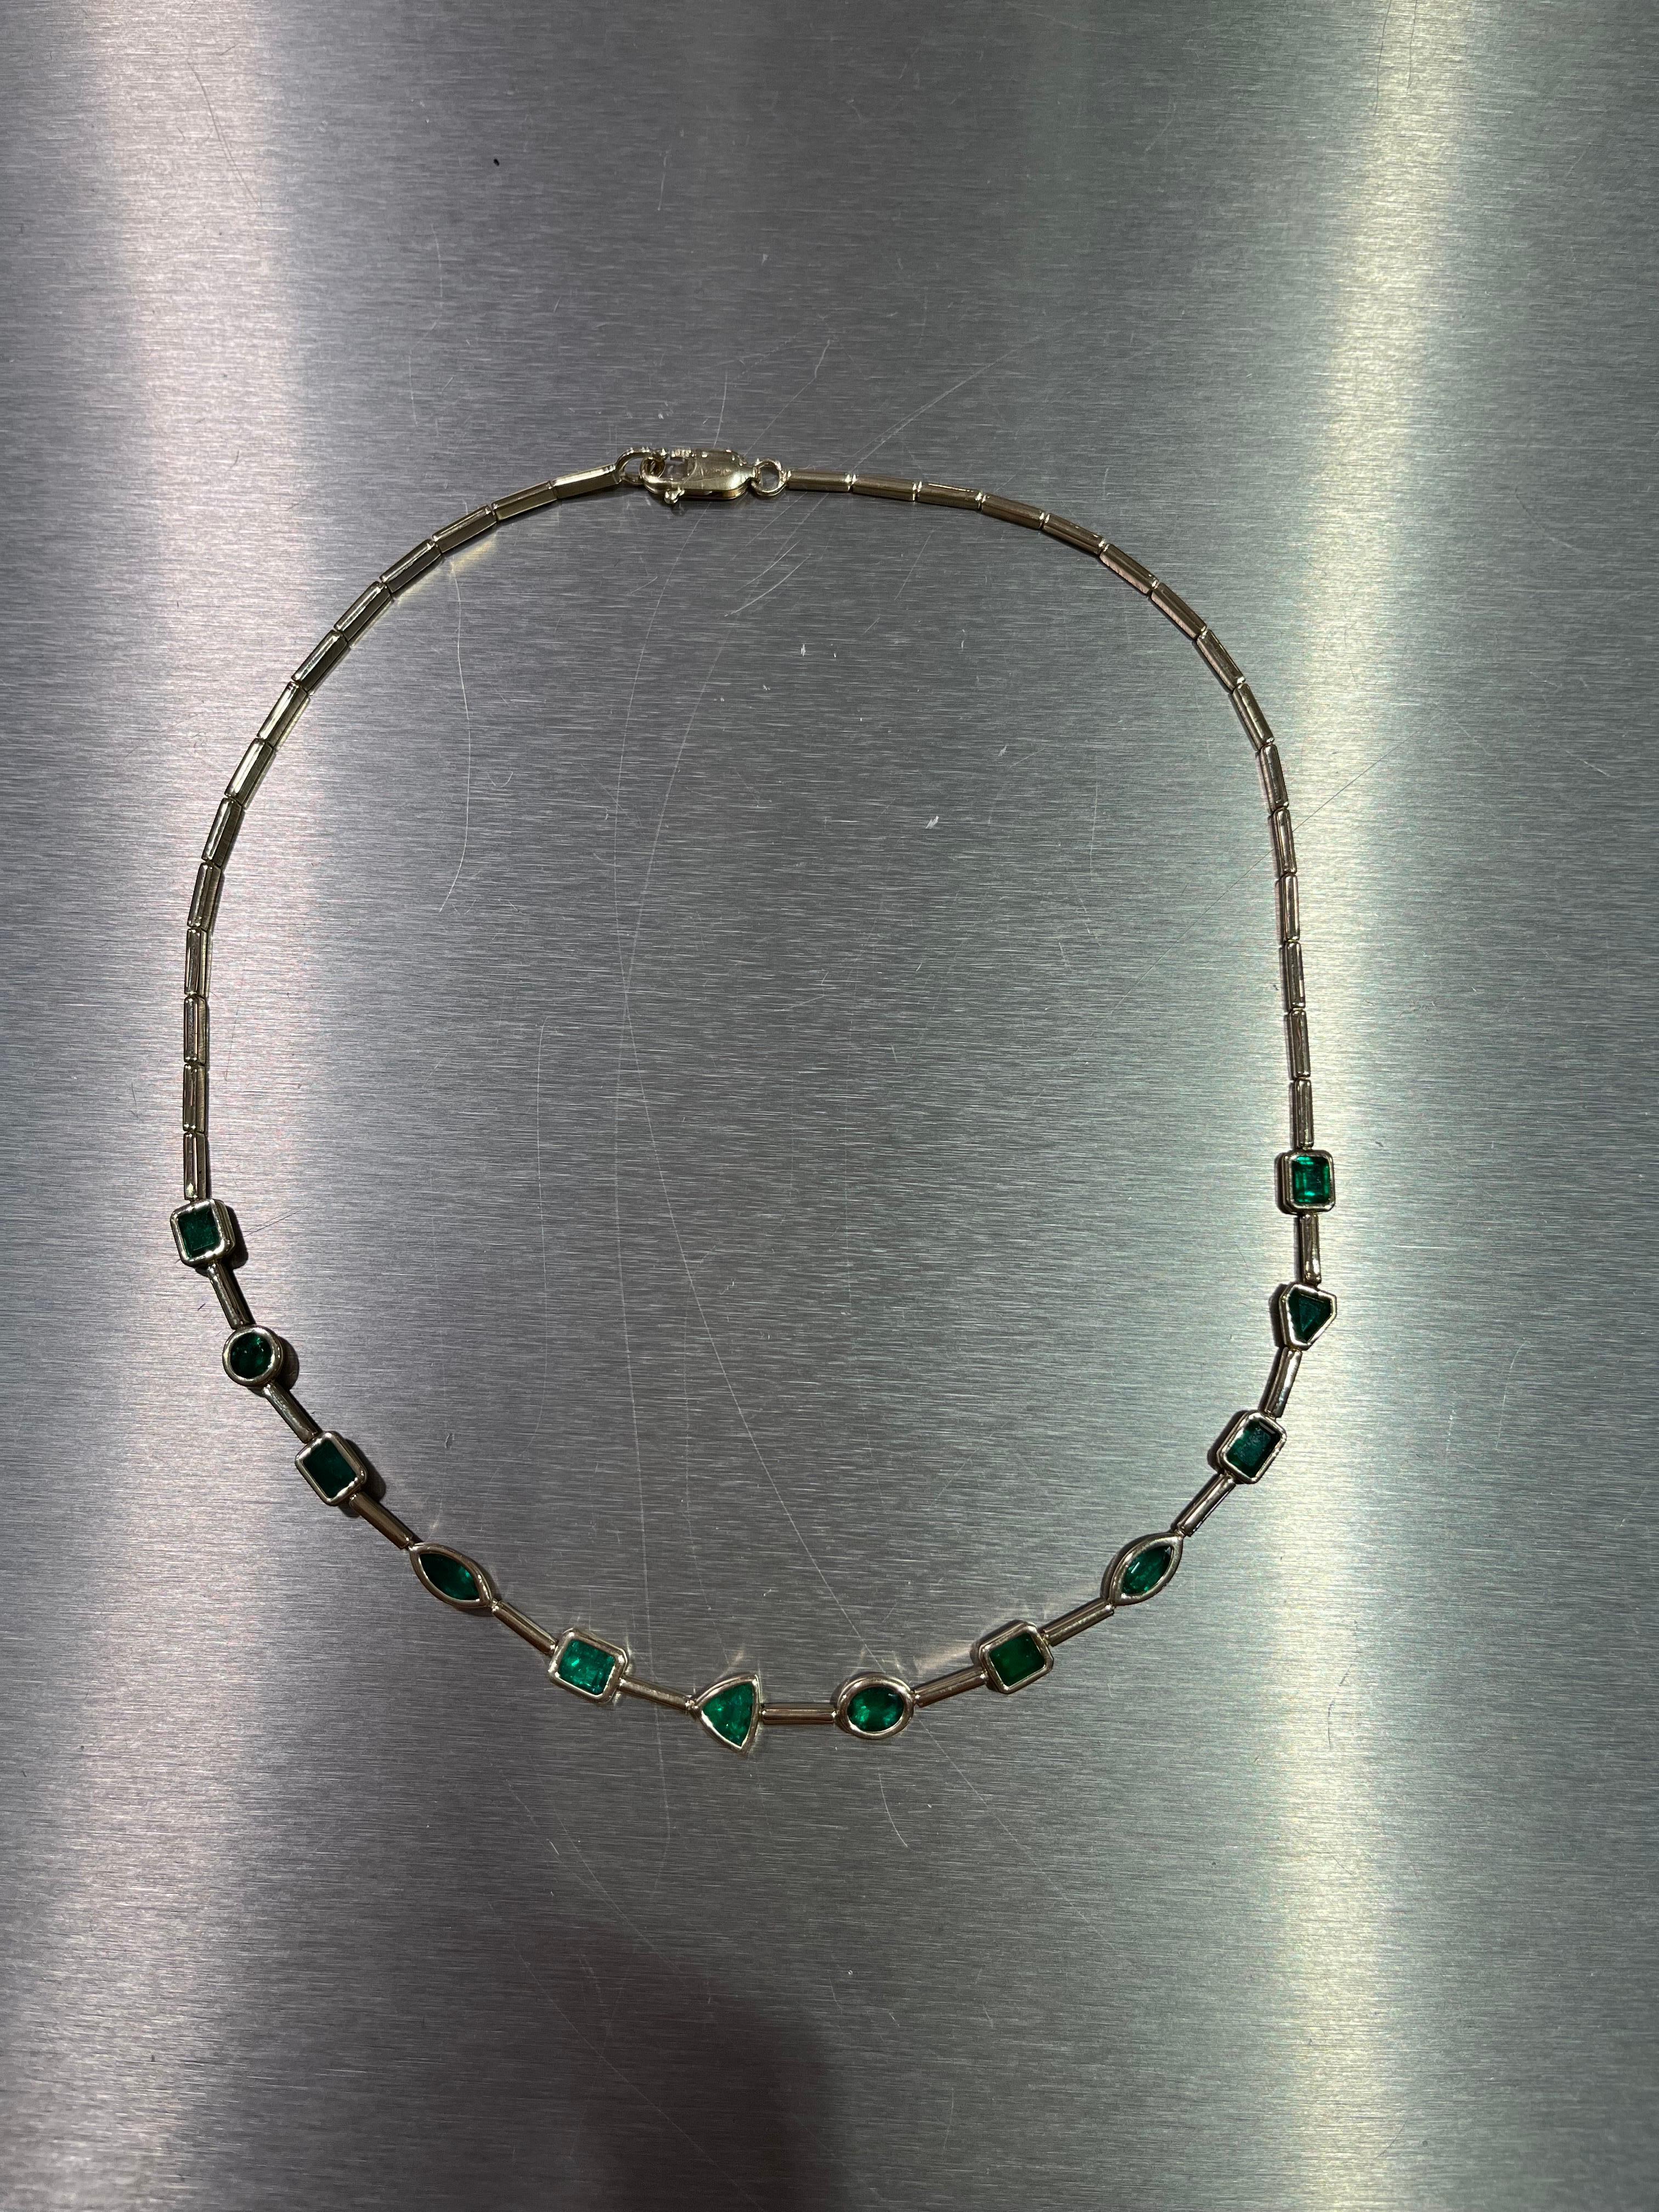 Fancy shape green emeralds set in 14K yellow gold. The necklace is set with 12 different shape stones ranging from 0.45-0.50 carats each. The necklace is set with mixed emerald, ovals, rounds, marquise, and triangle shaped stones. The total weight